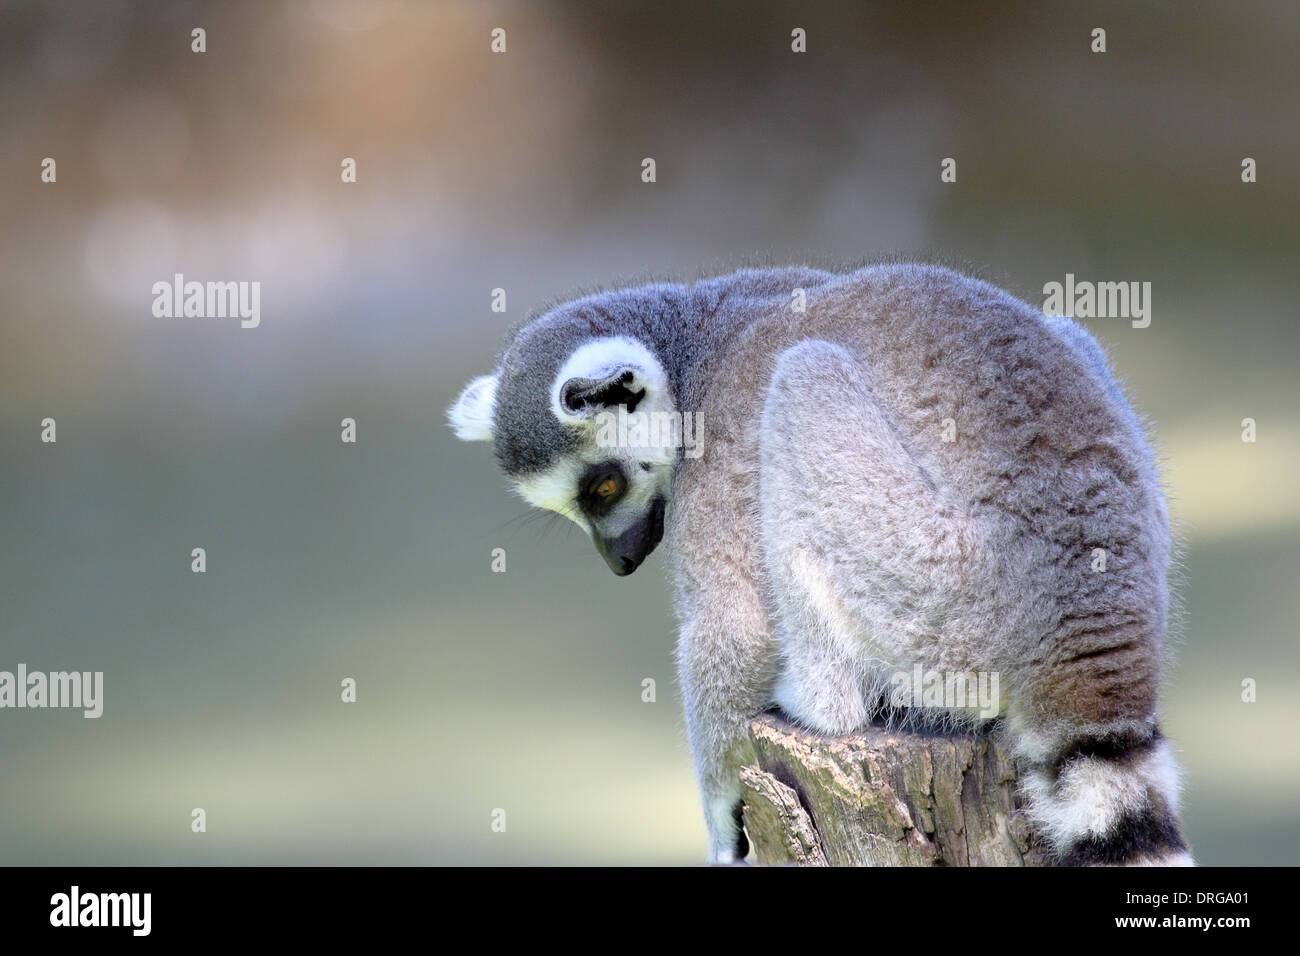 A ring-tailed lemur (Lemur catta) sitting on a log and looking down Stock Photo